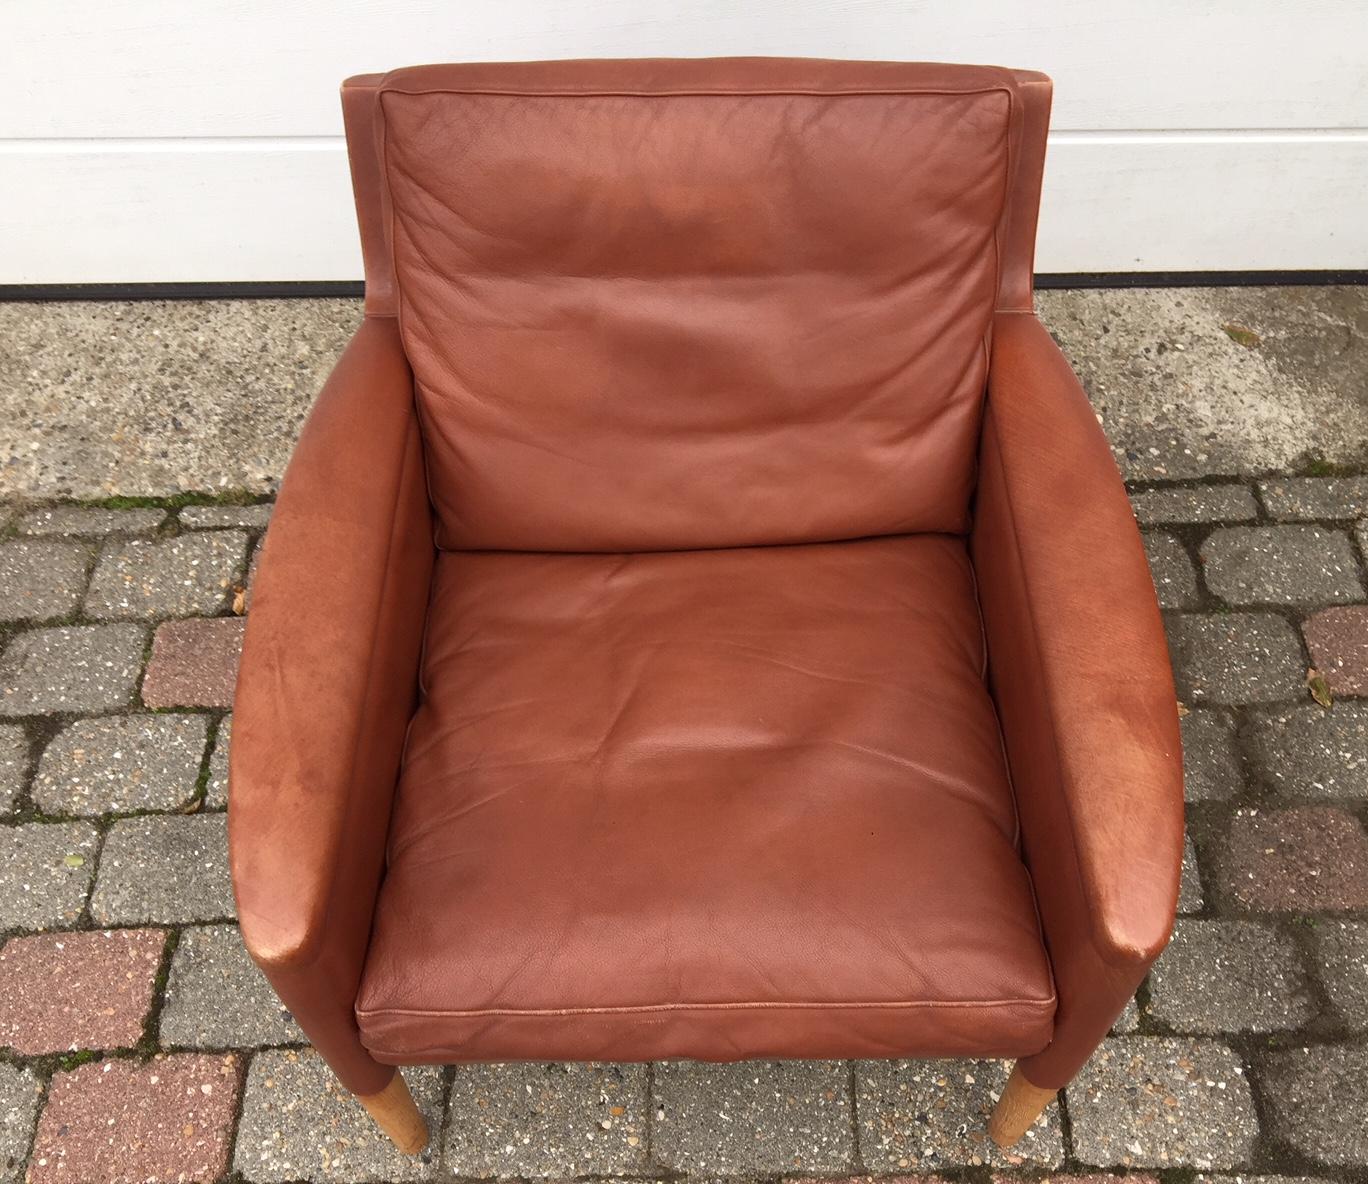 Mid-Century Modern Danish Modern Lounge Chair in Cognac Tanned Leather, Model 55 by Kurt Østervig